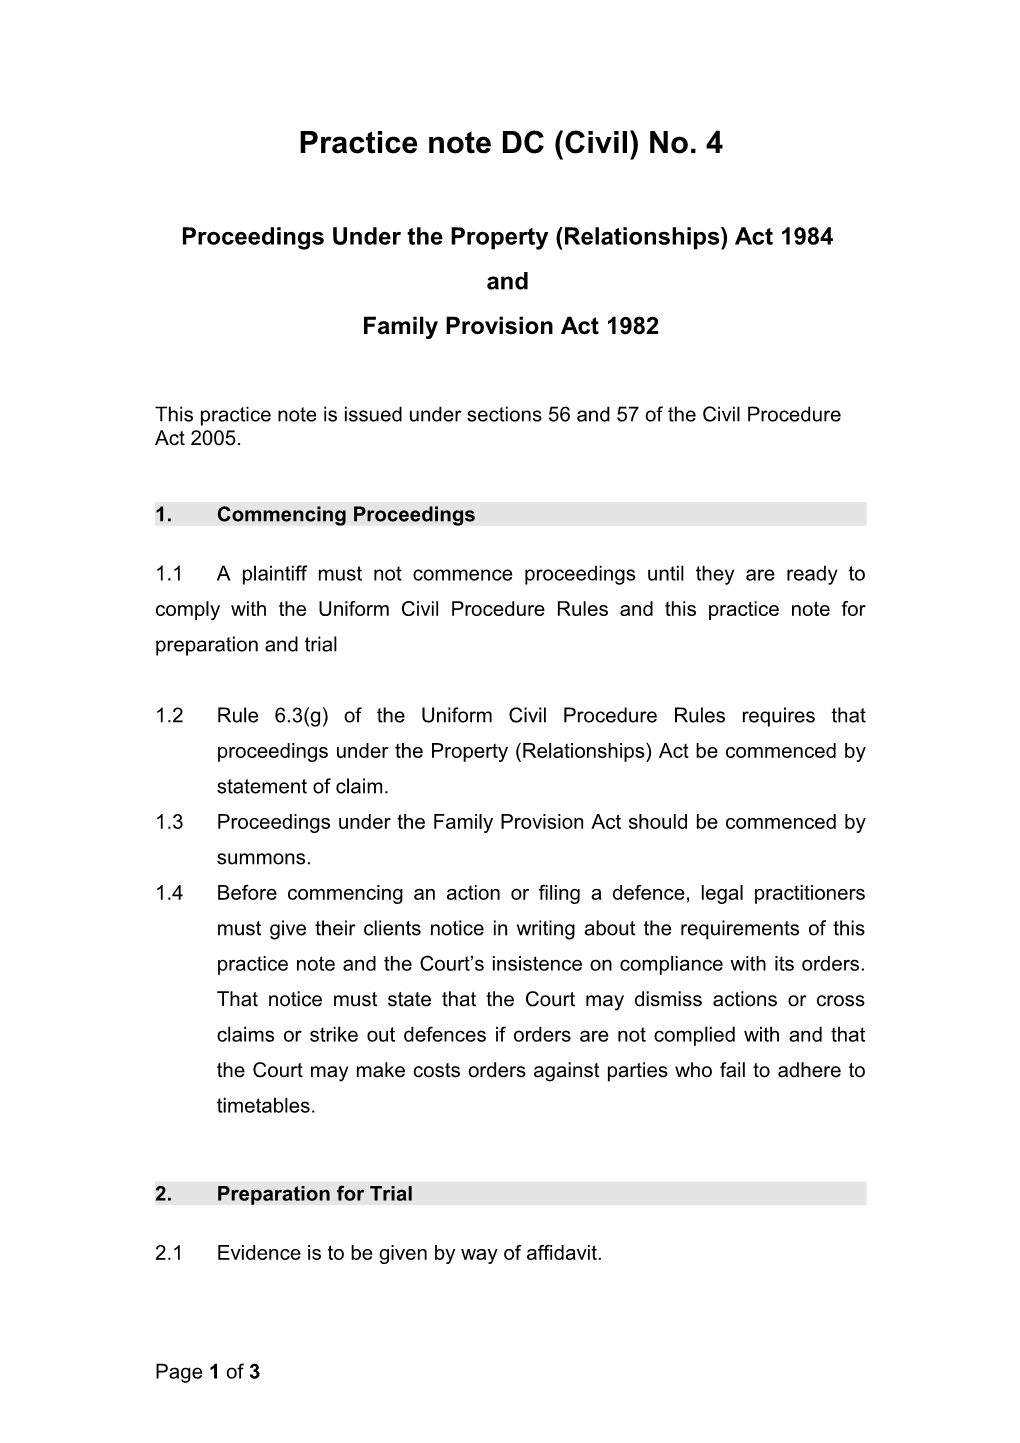 Practice Note - Property Family Provisions (Civil)